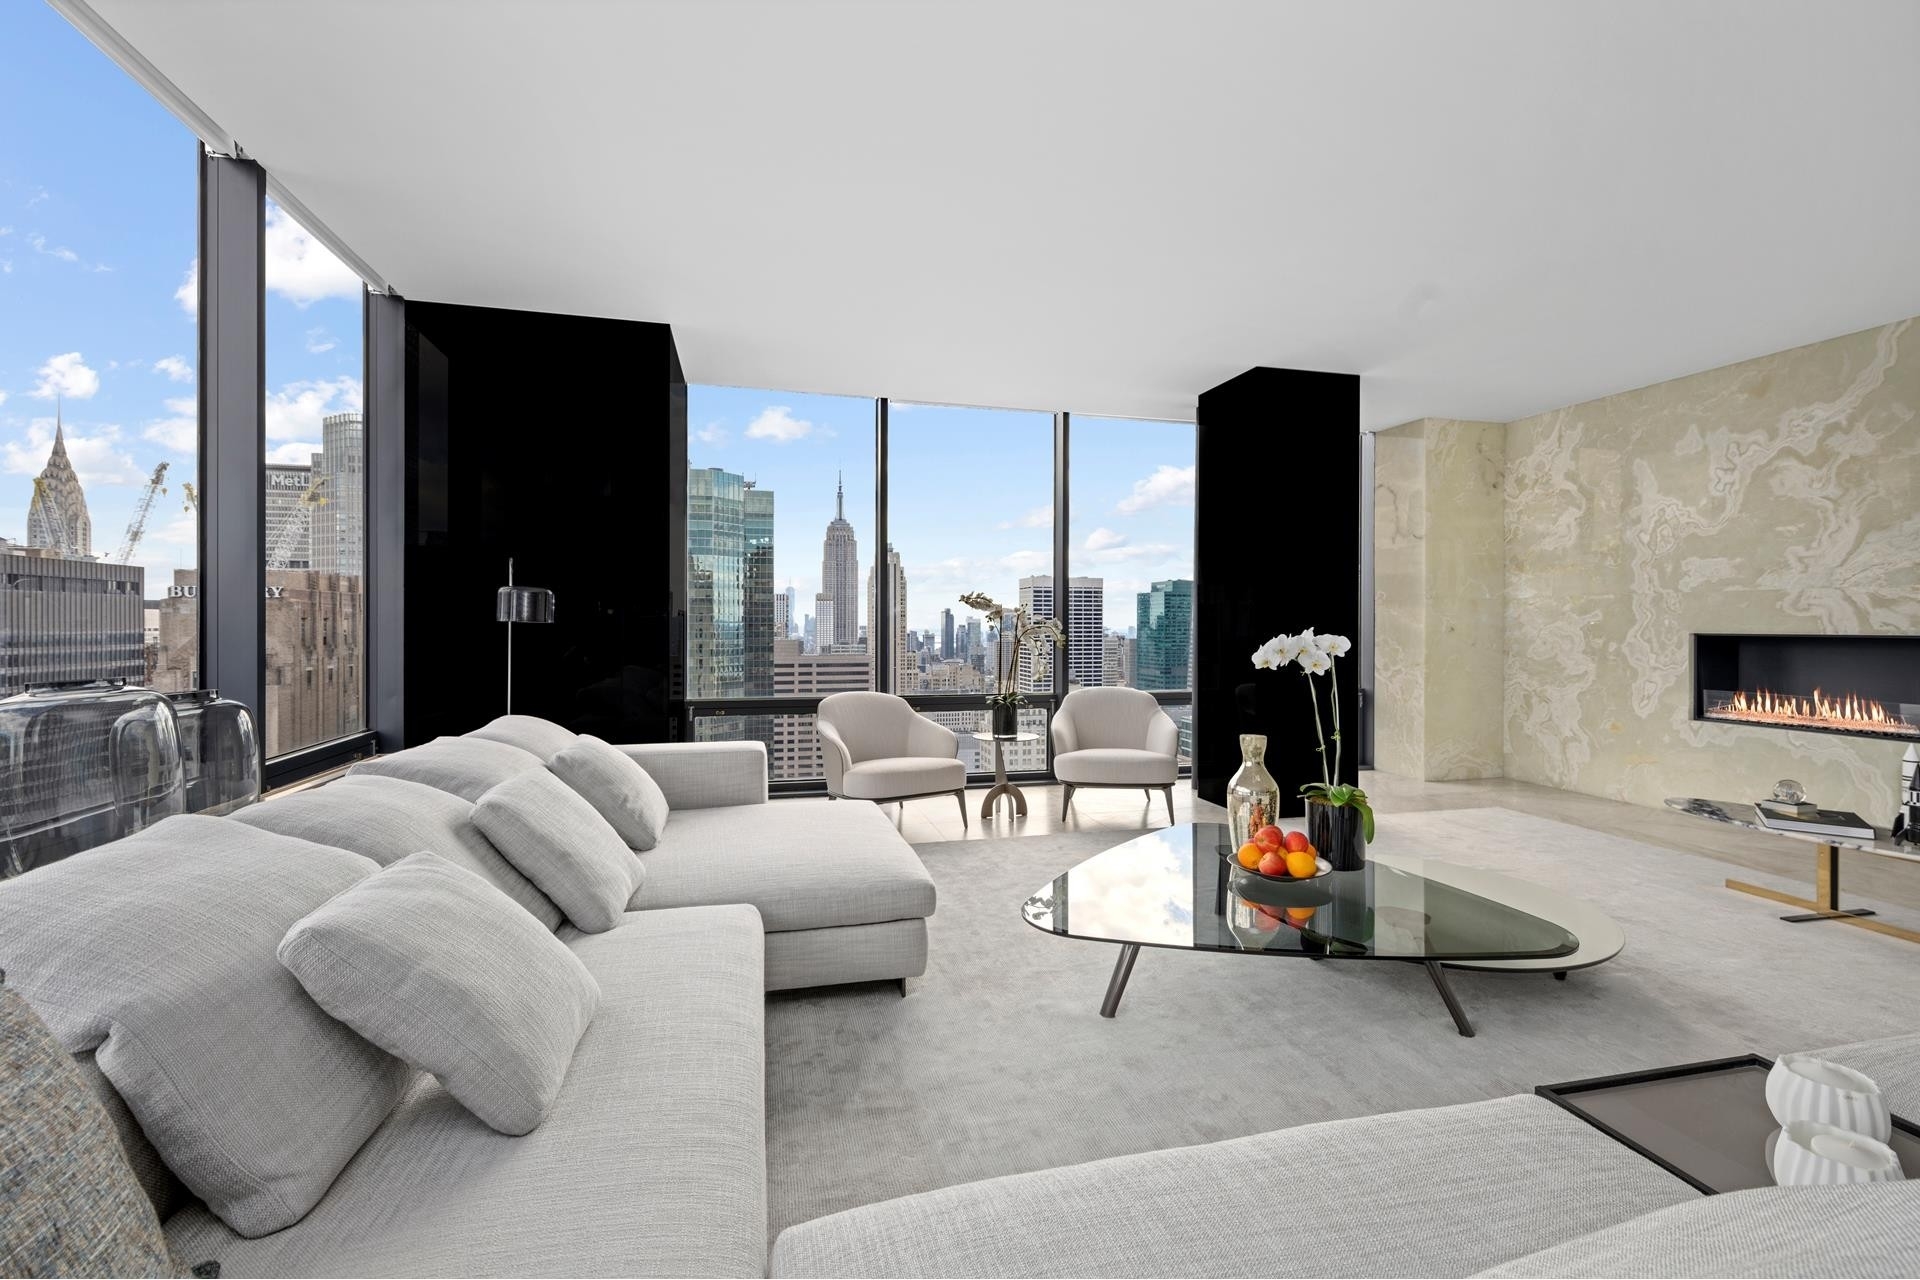 Condominium for Sale at Olympic Tower, 641 FIFTH AVE, 42DE Midtown East, New York, New York 10022